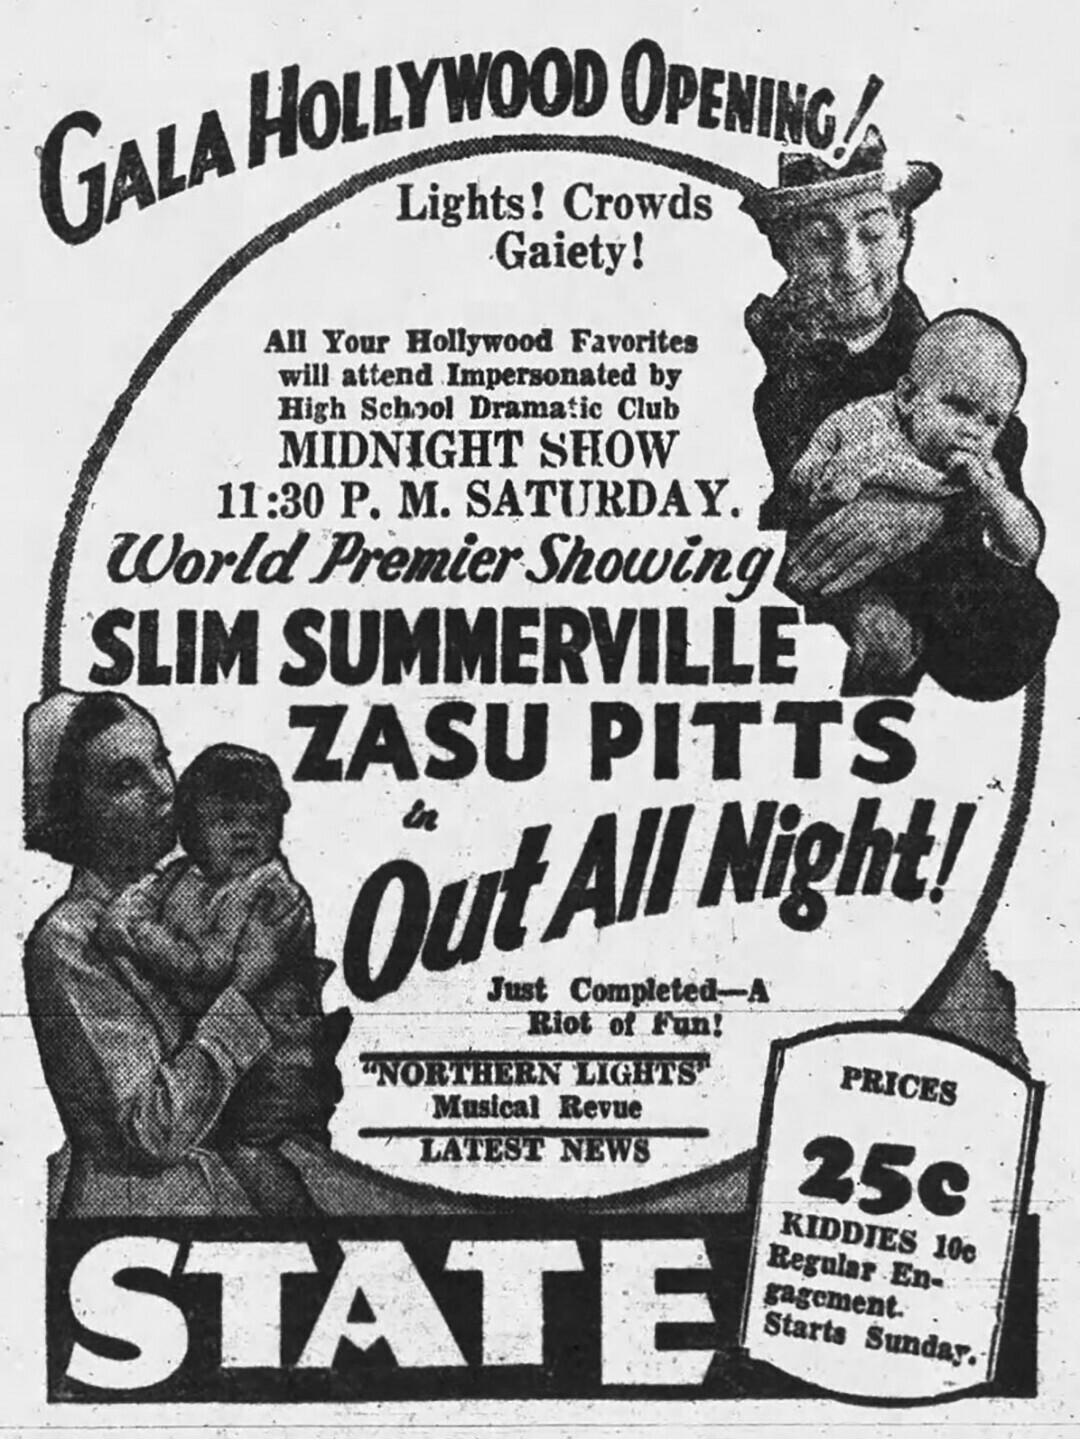 A contemporary newspaper ad for the film premiere.